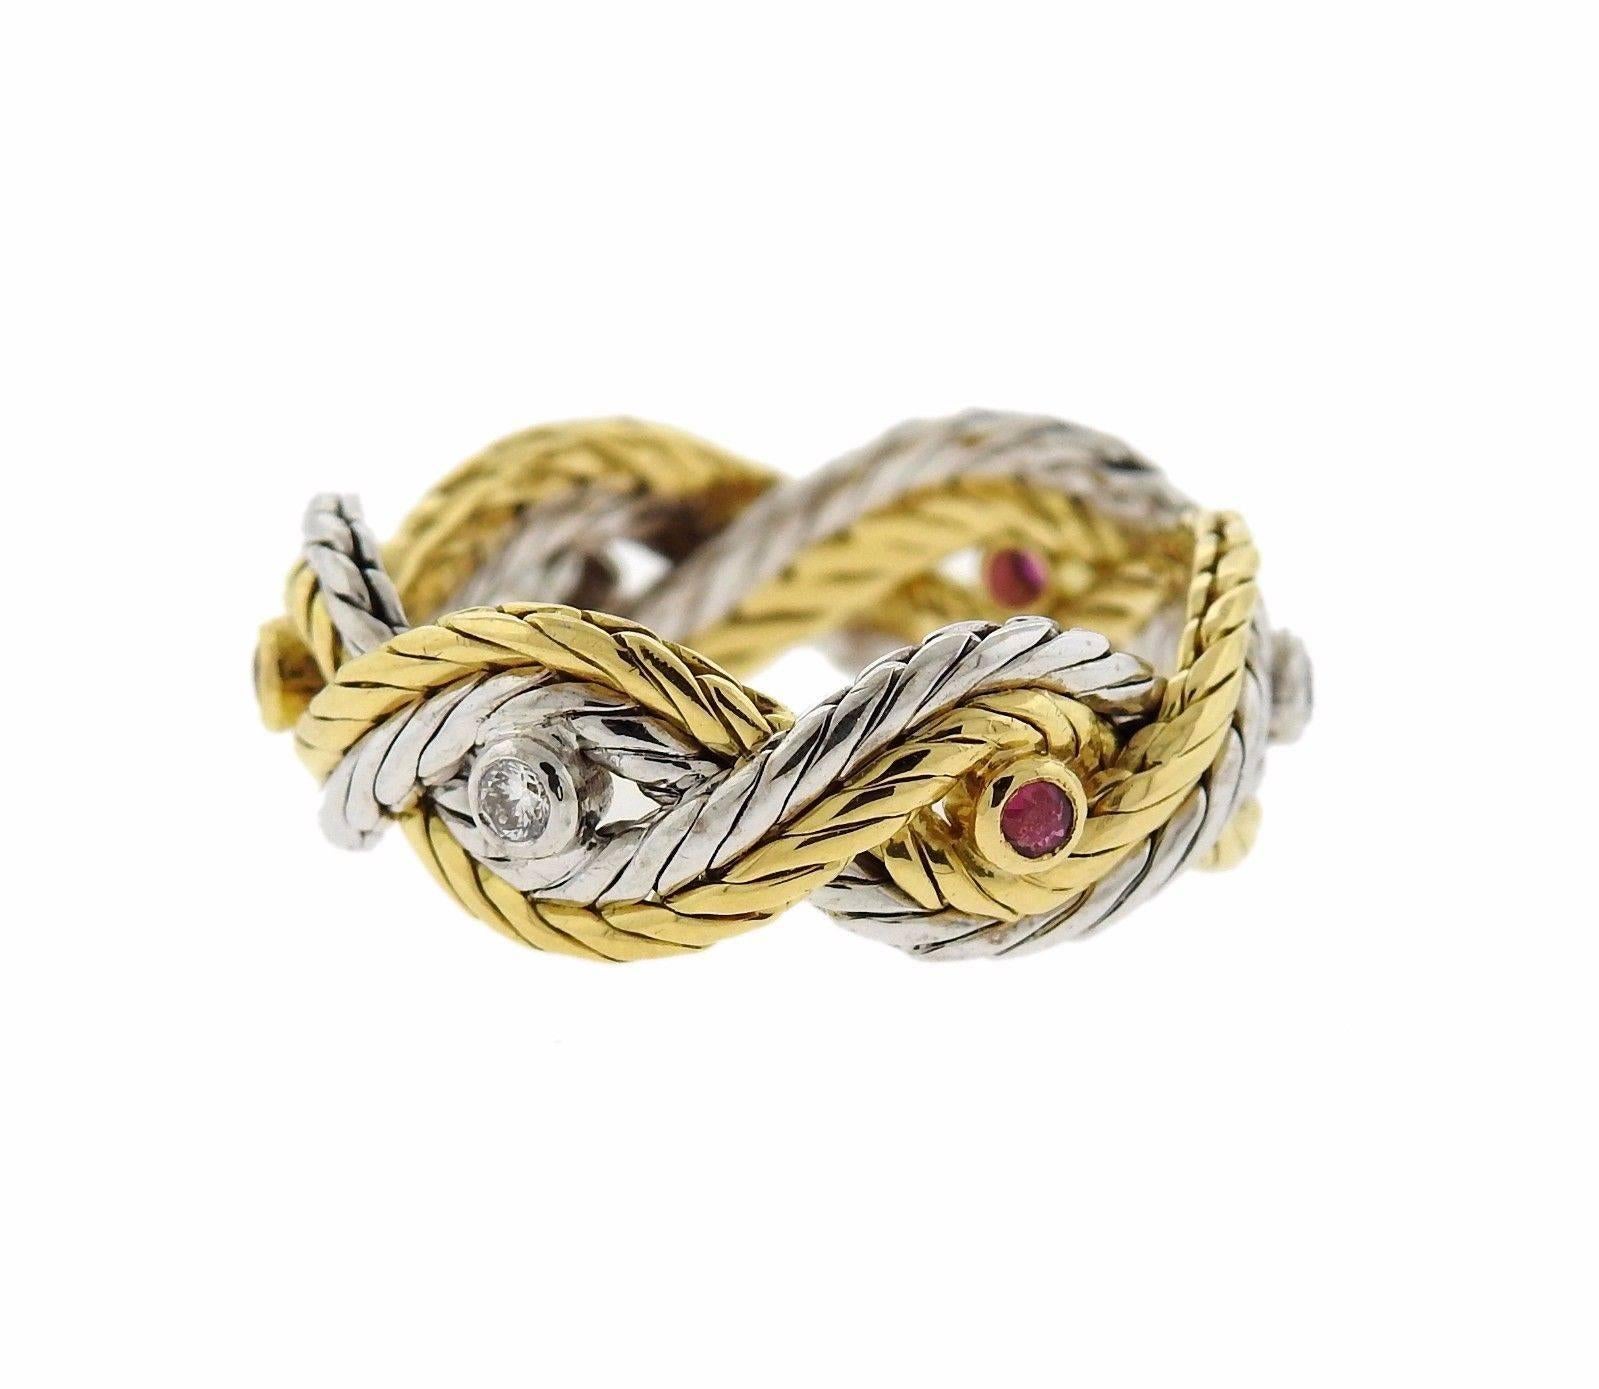 An 18k gold band ring set with rubies and approximately 0.06ctw of G/VS diamonds.  The ring is a size 8.5 and is 8mm wide. The weight of the piece is 8 grams. Marked: Buccellati, 750, Italy, 18kt.